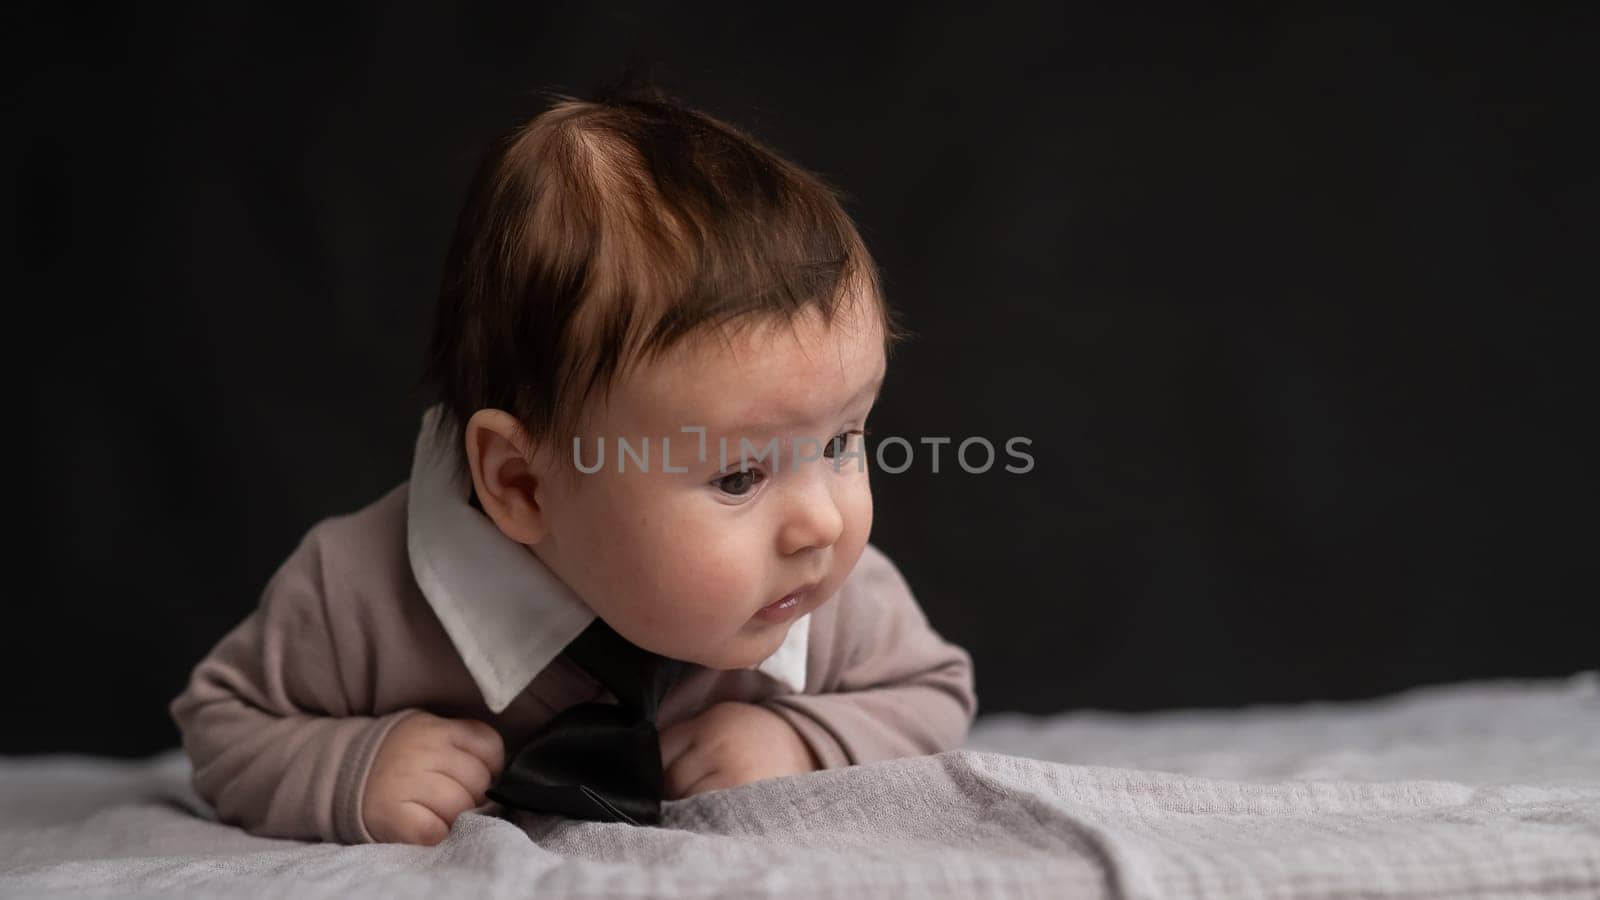 Portrait of a baby lying on his stomach wearing a tie on a black background. by mrwed54